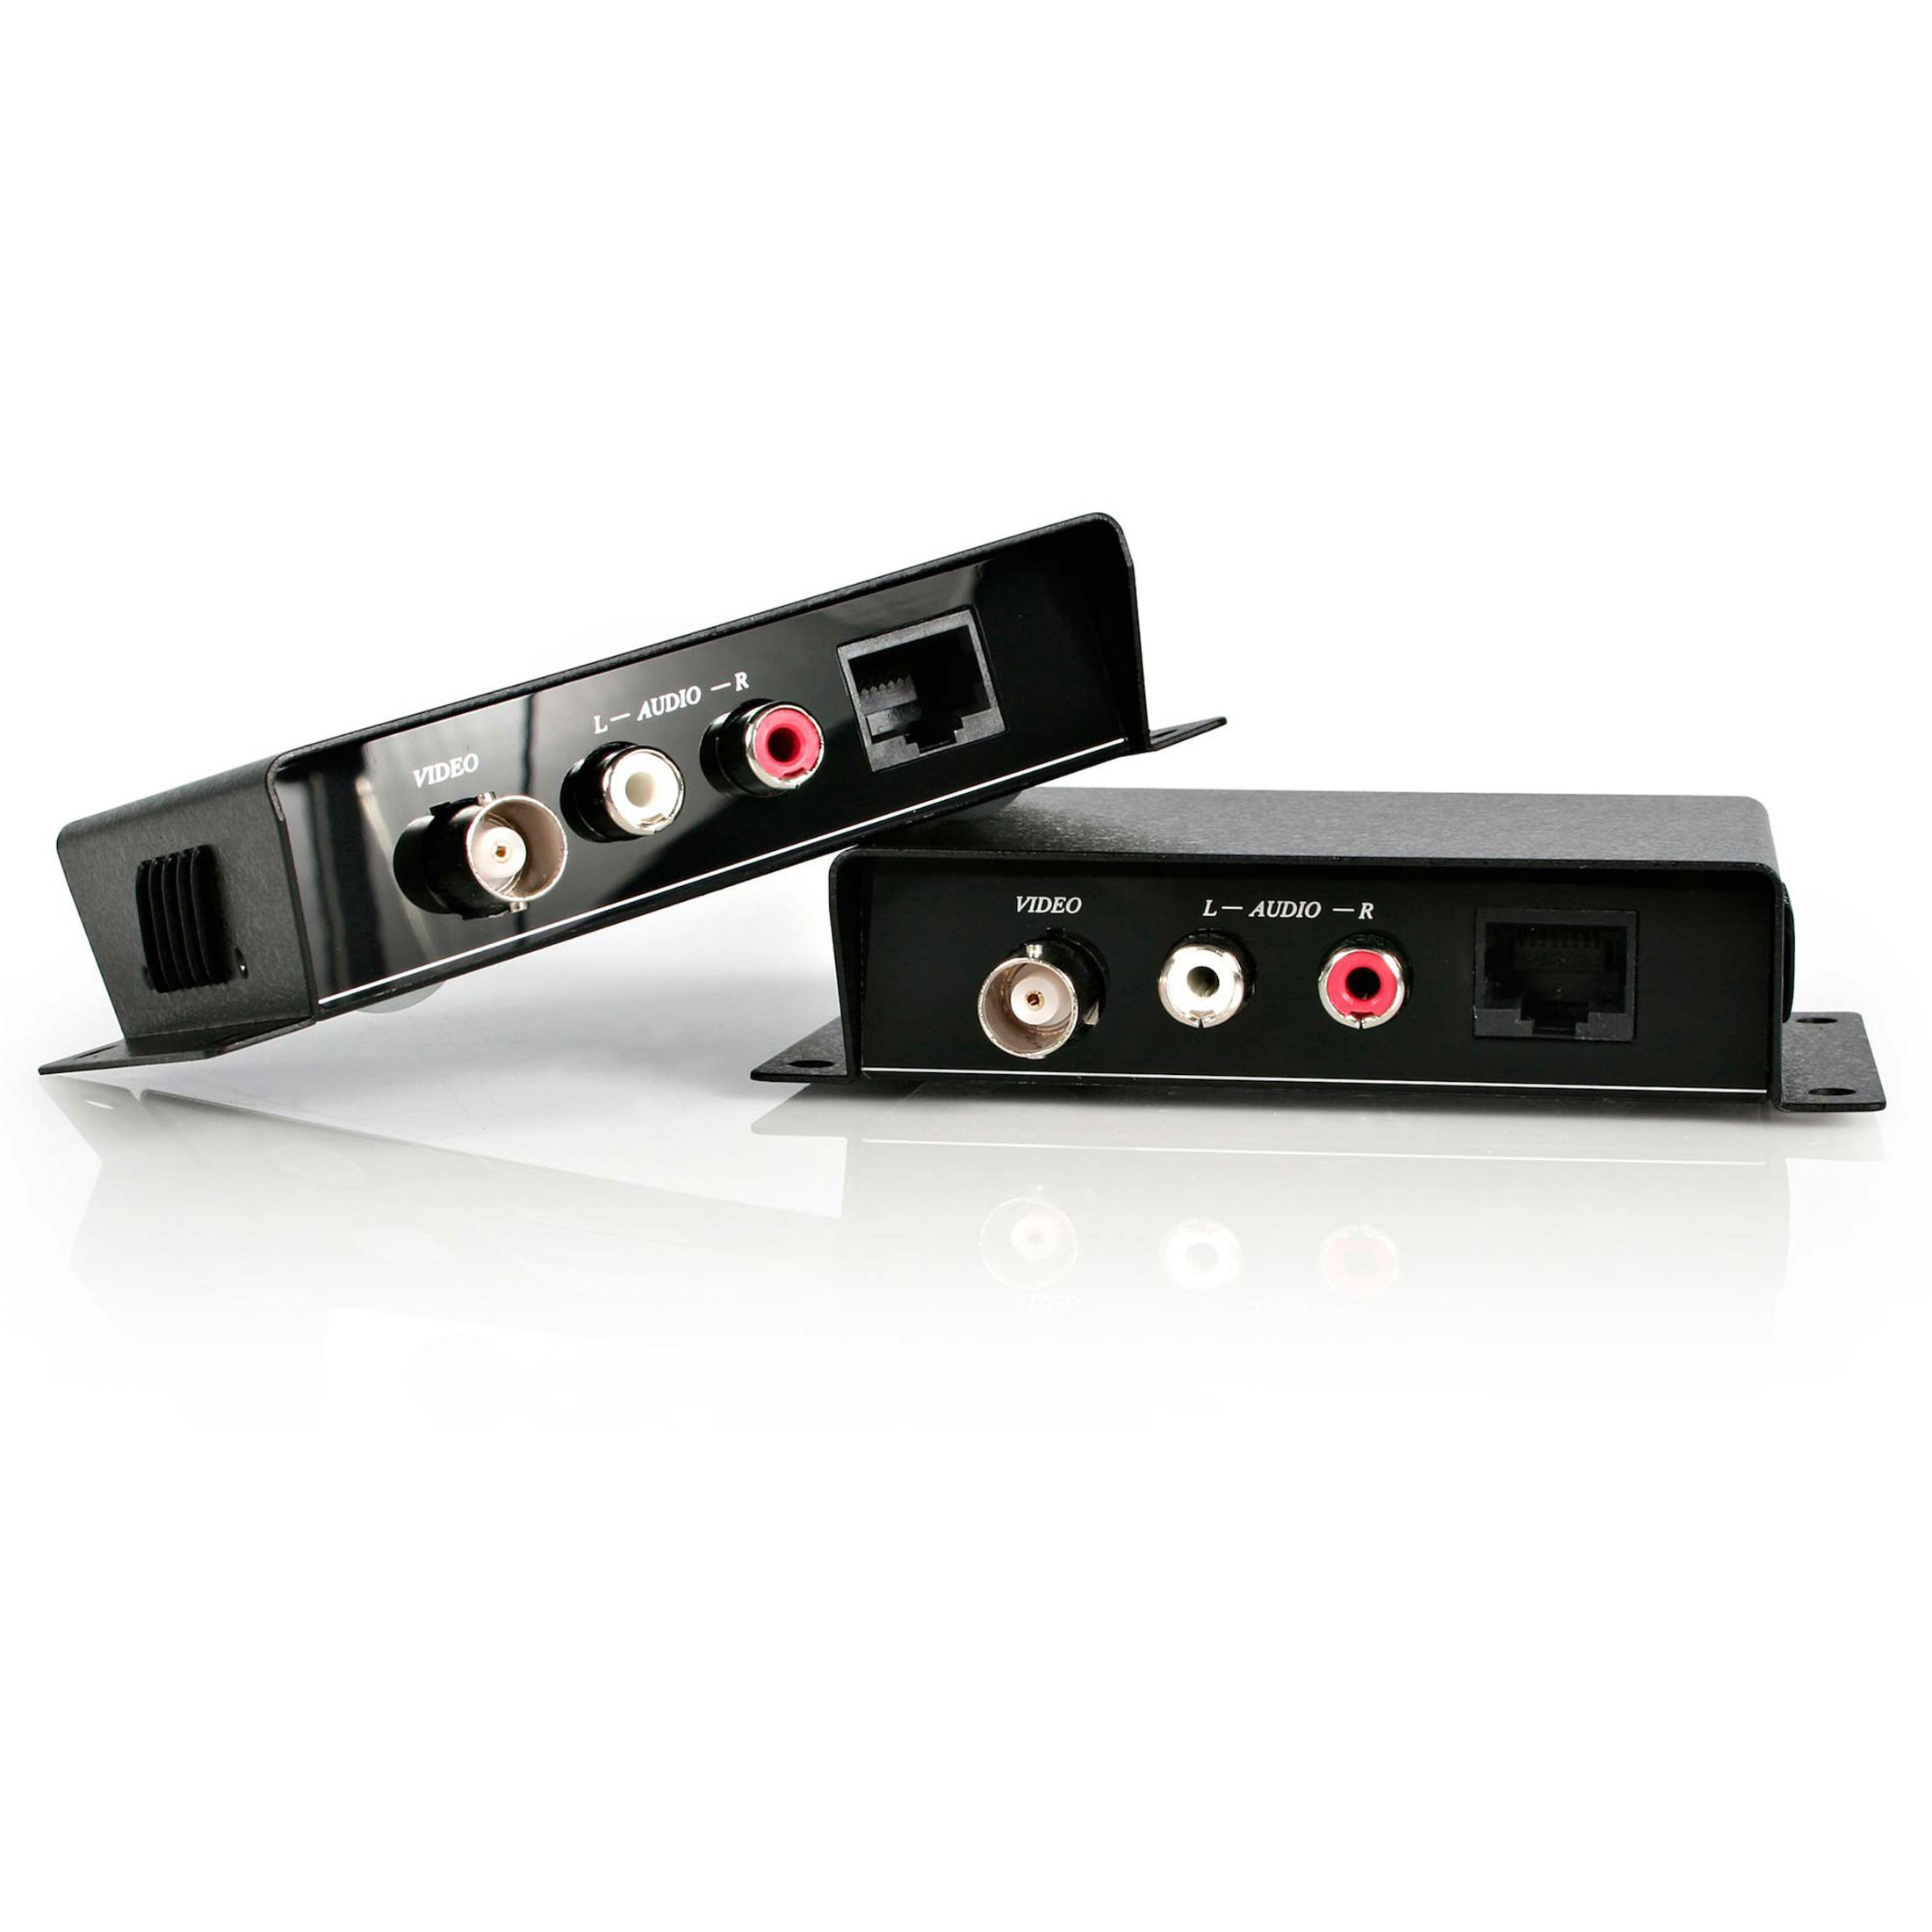 Startech .com .com Composite Video Extender over Cat 5 with AudioExtend a Composite video signal with supporting audio up to 200 m… COMPUTPEXTA